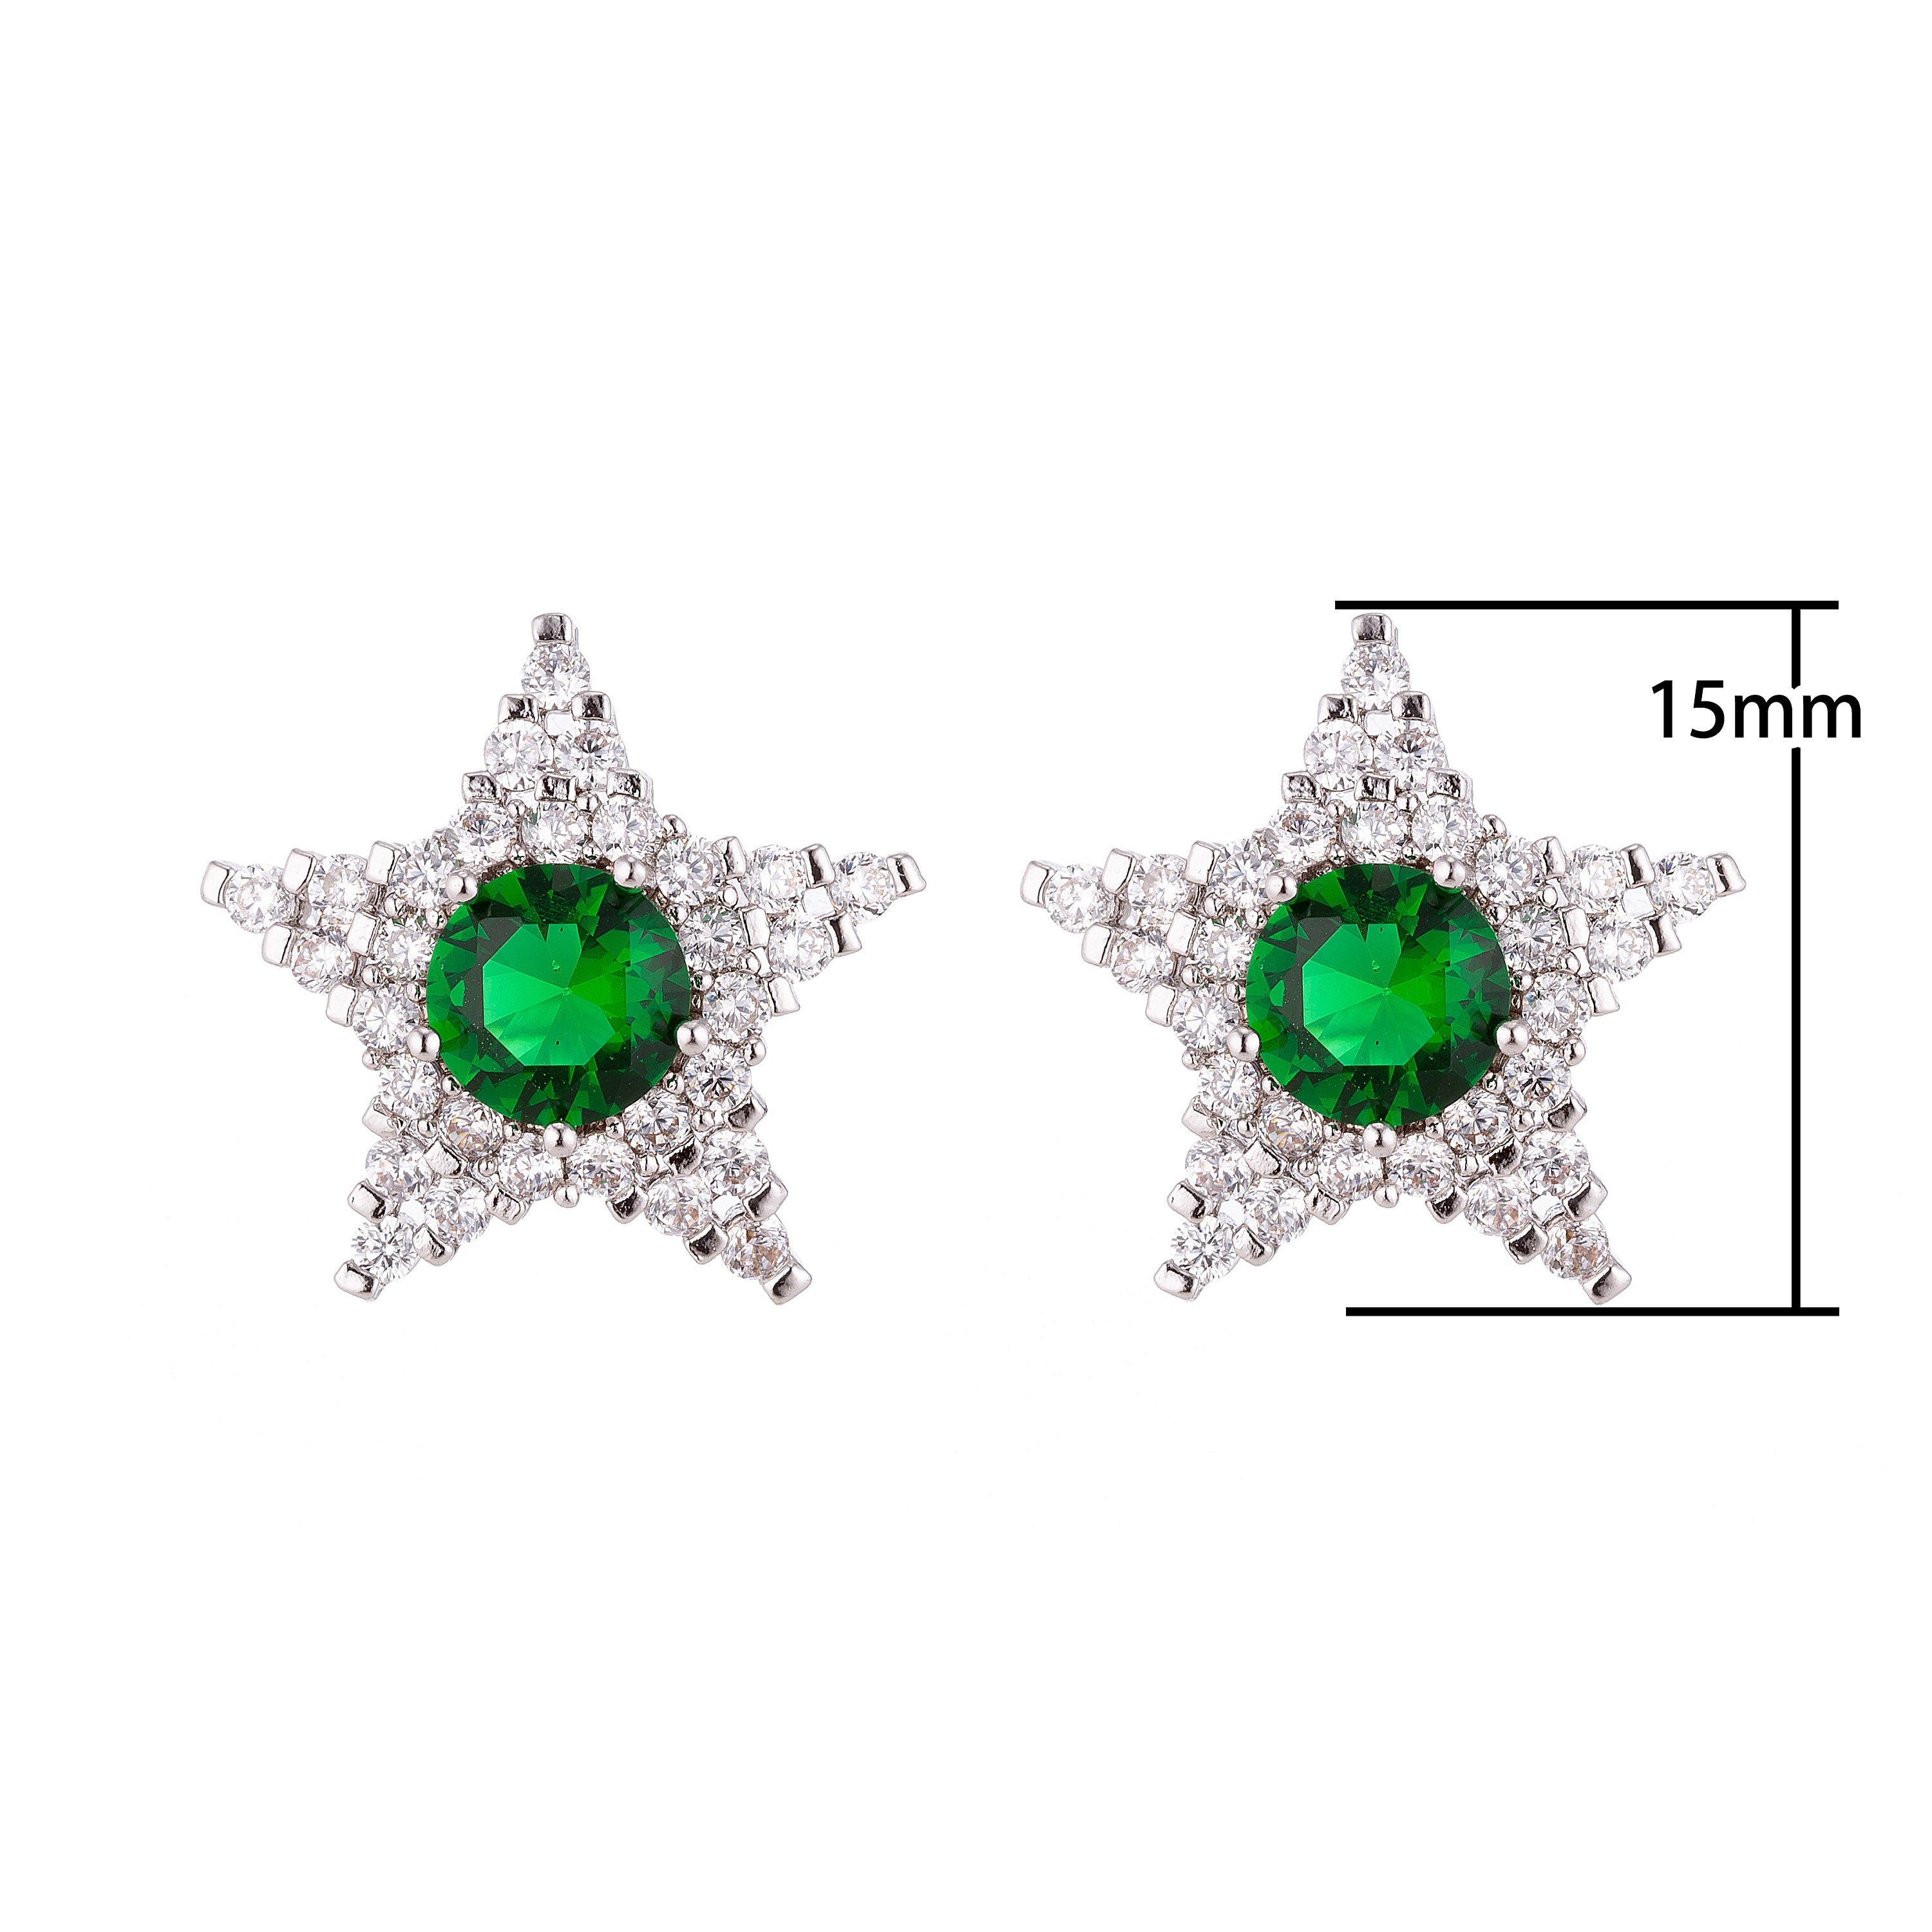 Silver Large Selected Color Gem Diamond Paved Stud Earring, with Large Gem, Cubic Zirconia Jewels, Star Earrings, Cubic Zirconia Gem - DLUXCA